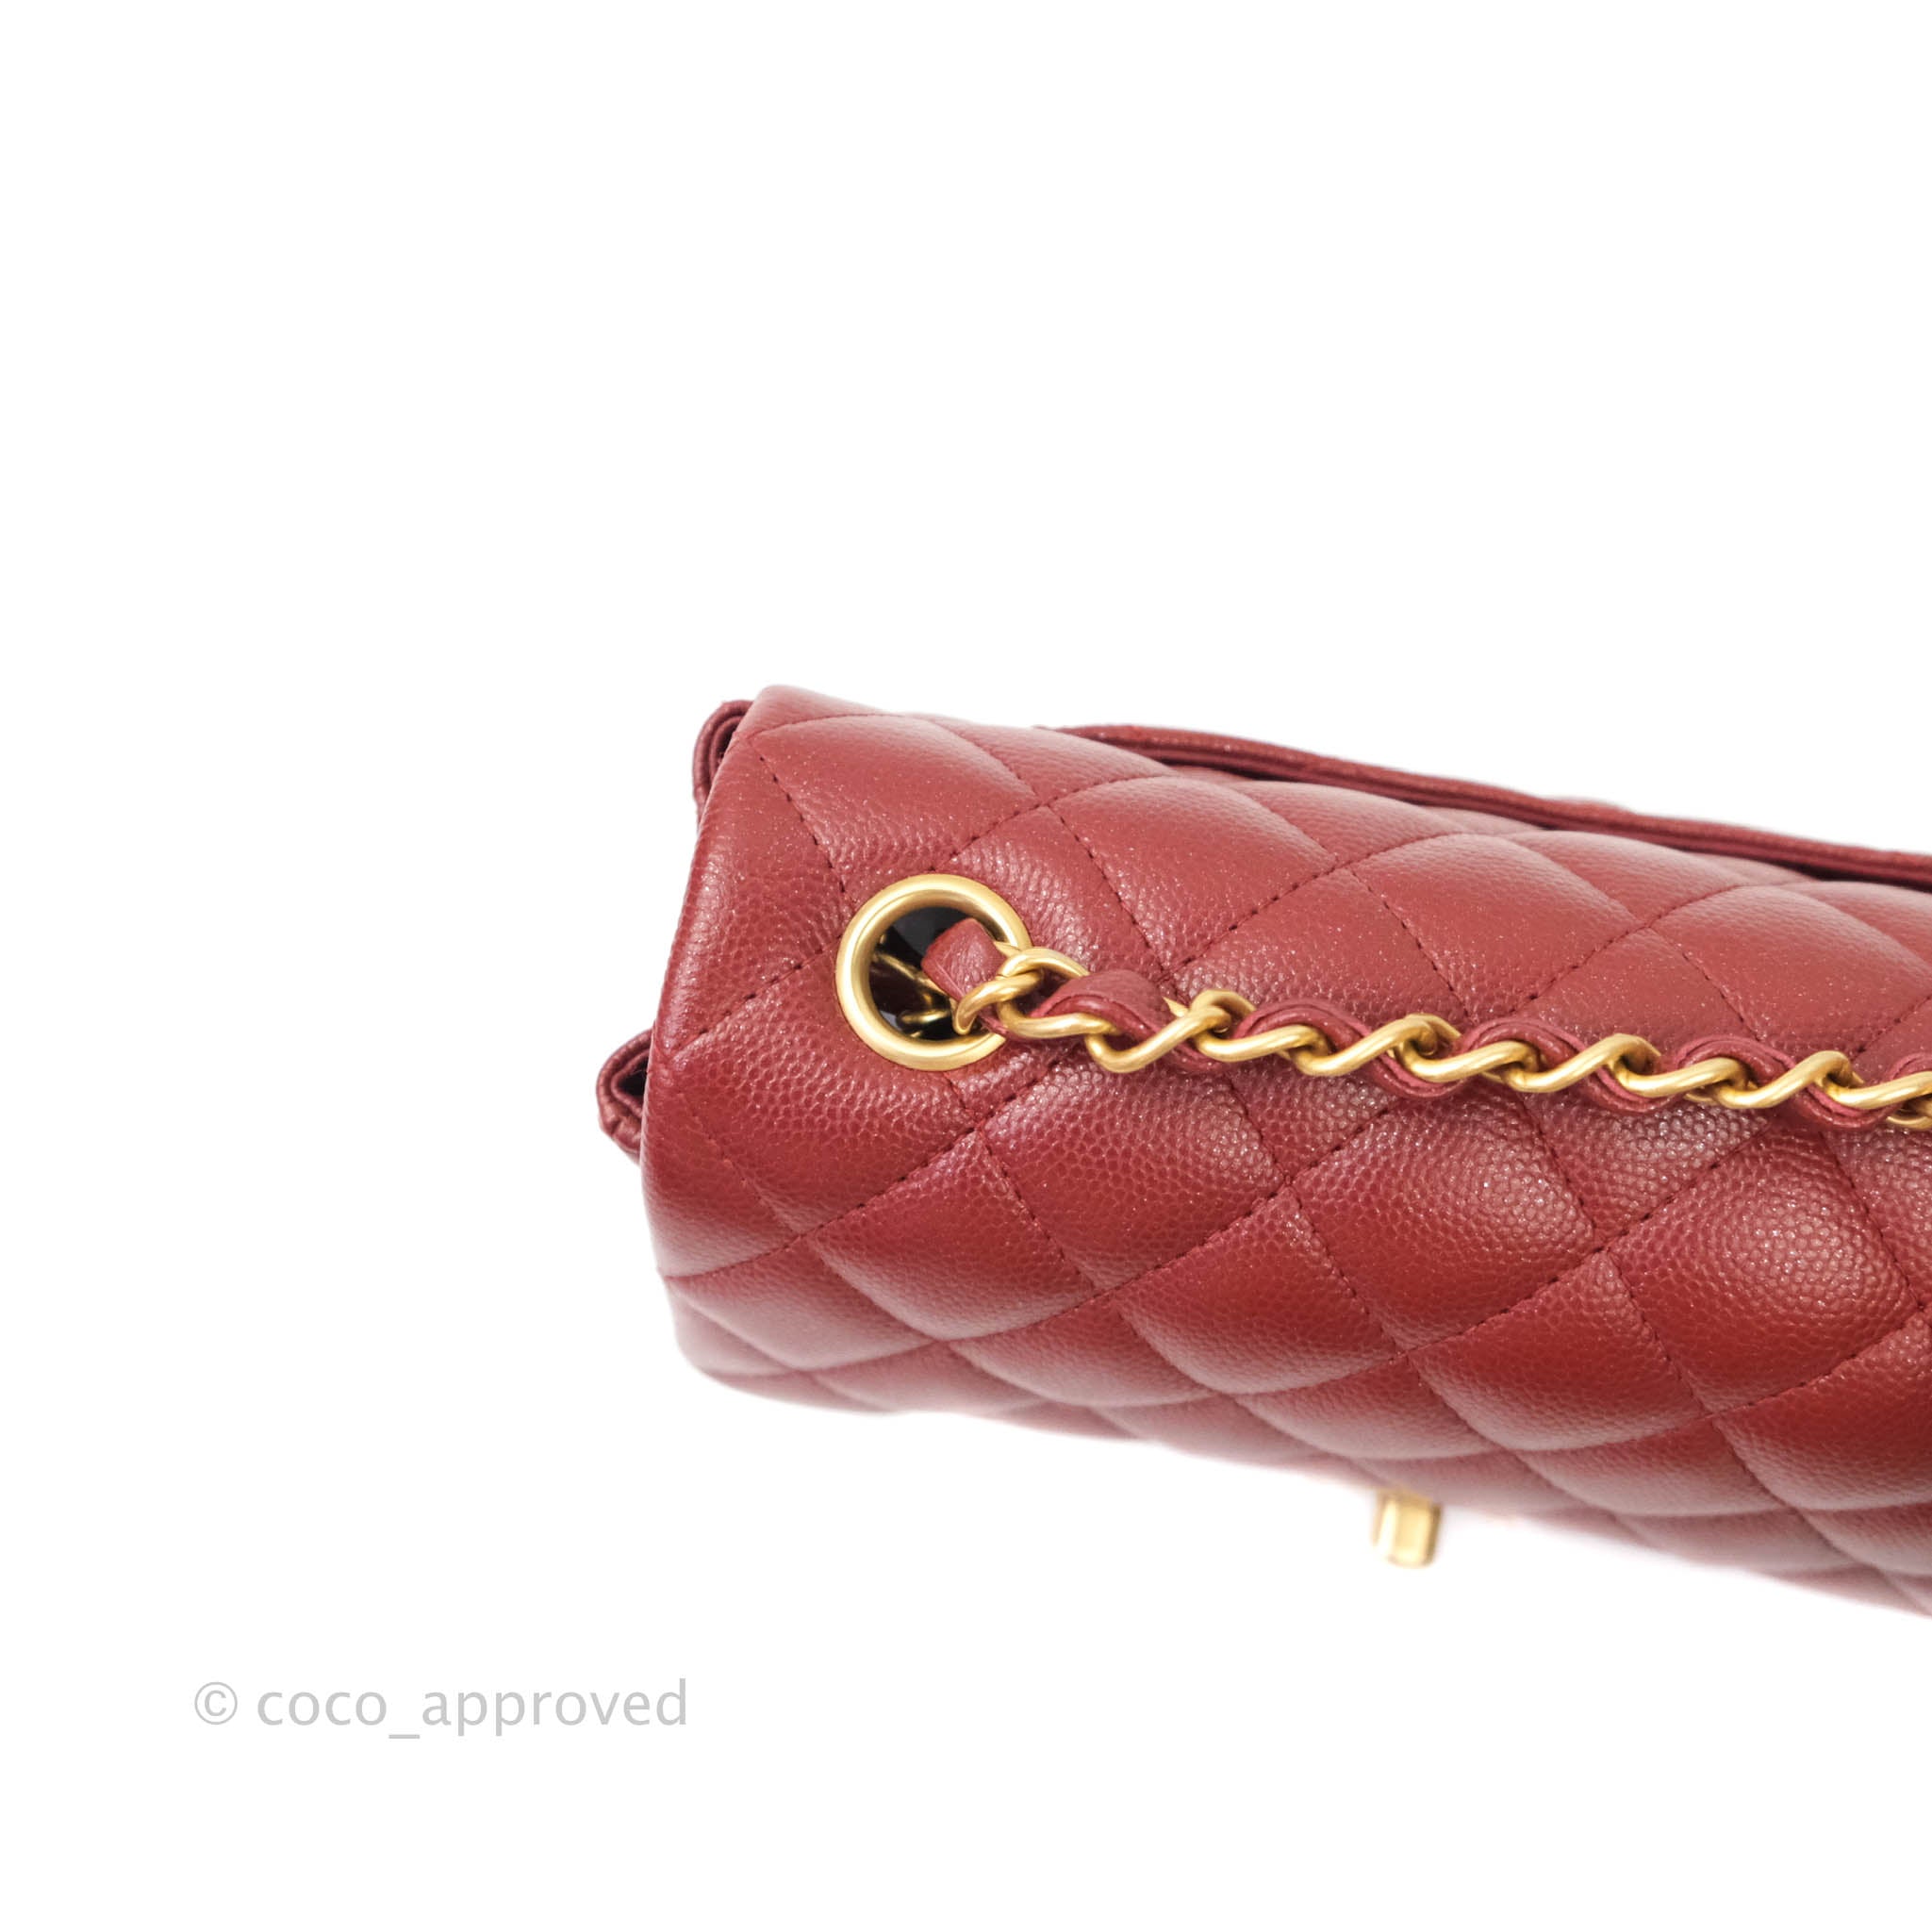 vintage red chanel purse